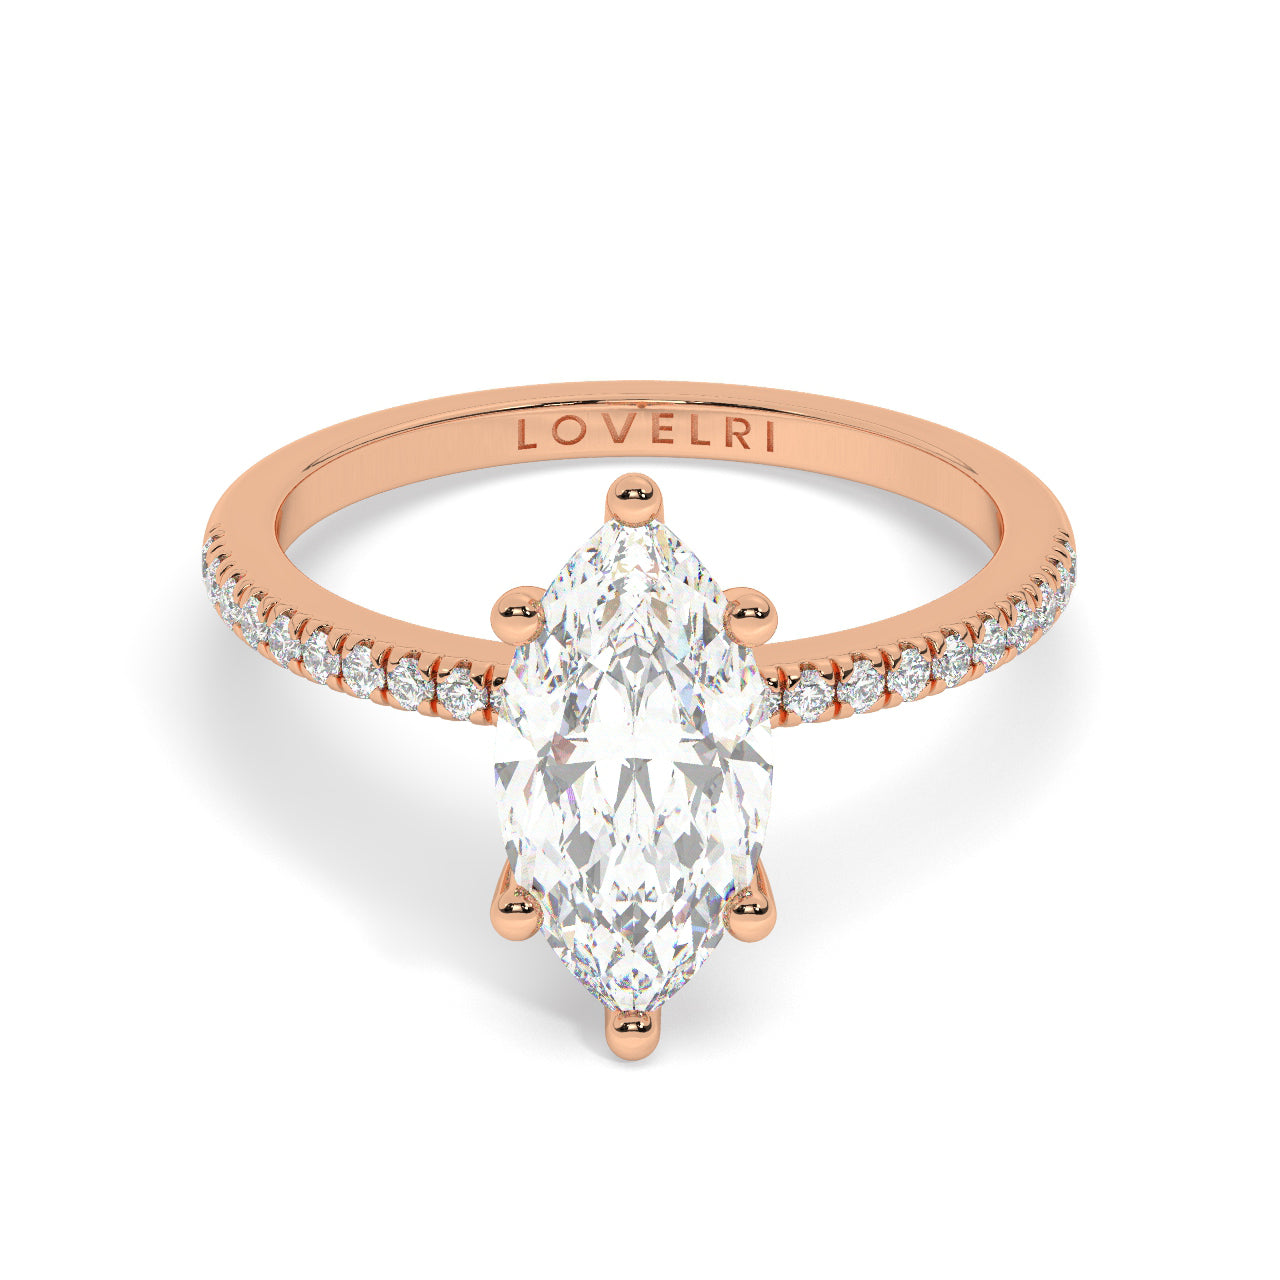 Marquise Cut Diamond Ring set on a Pavé Band in Rose Gold